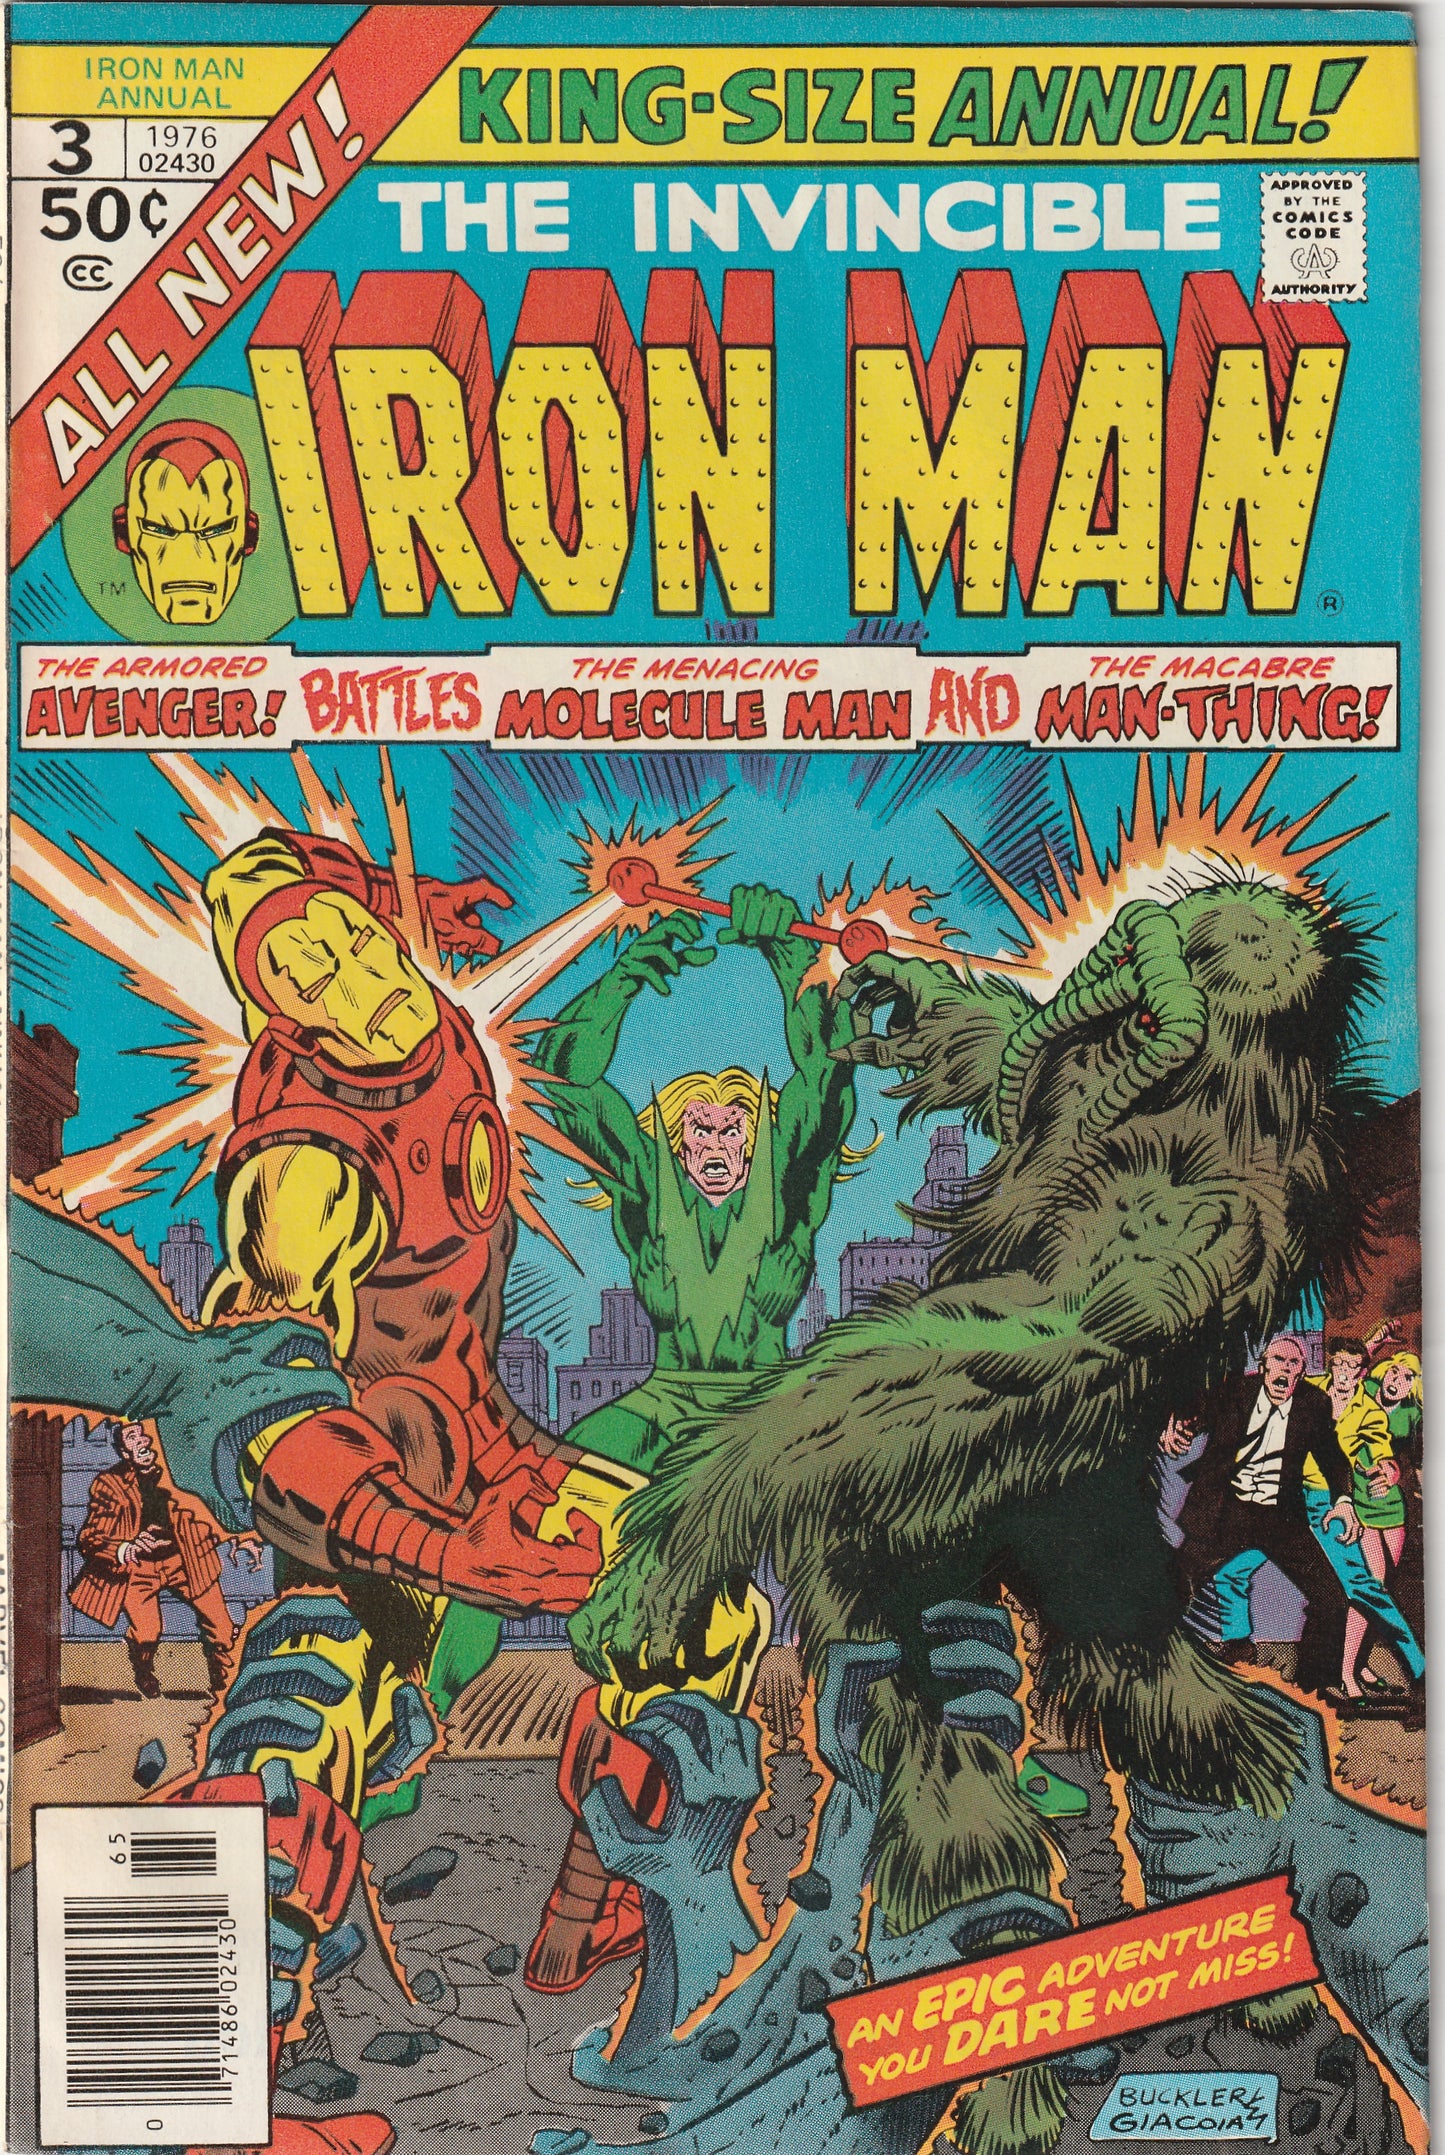 Iron Man Annual #3 (1976) - Man-Thing appearance